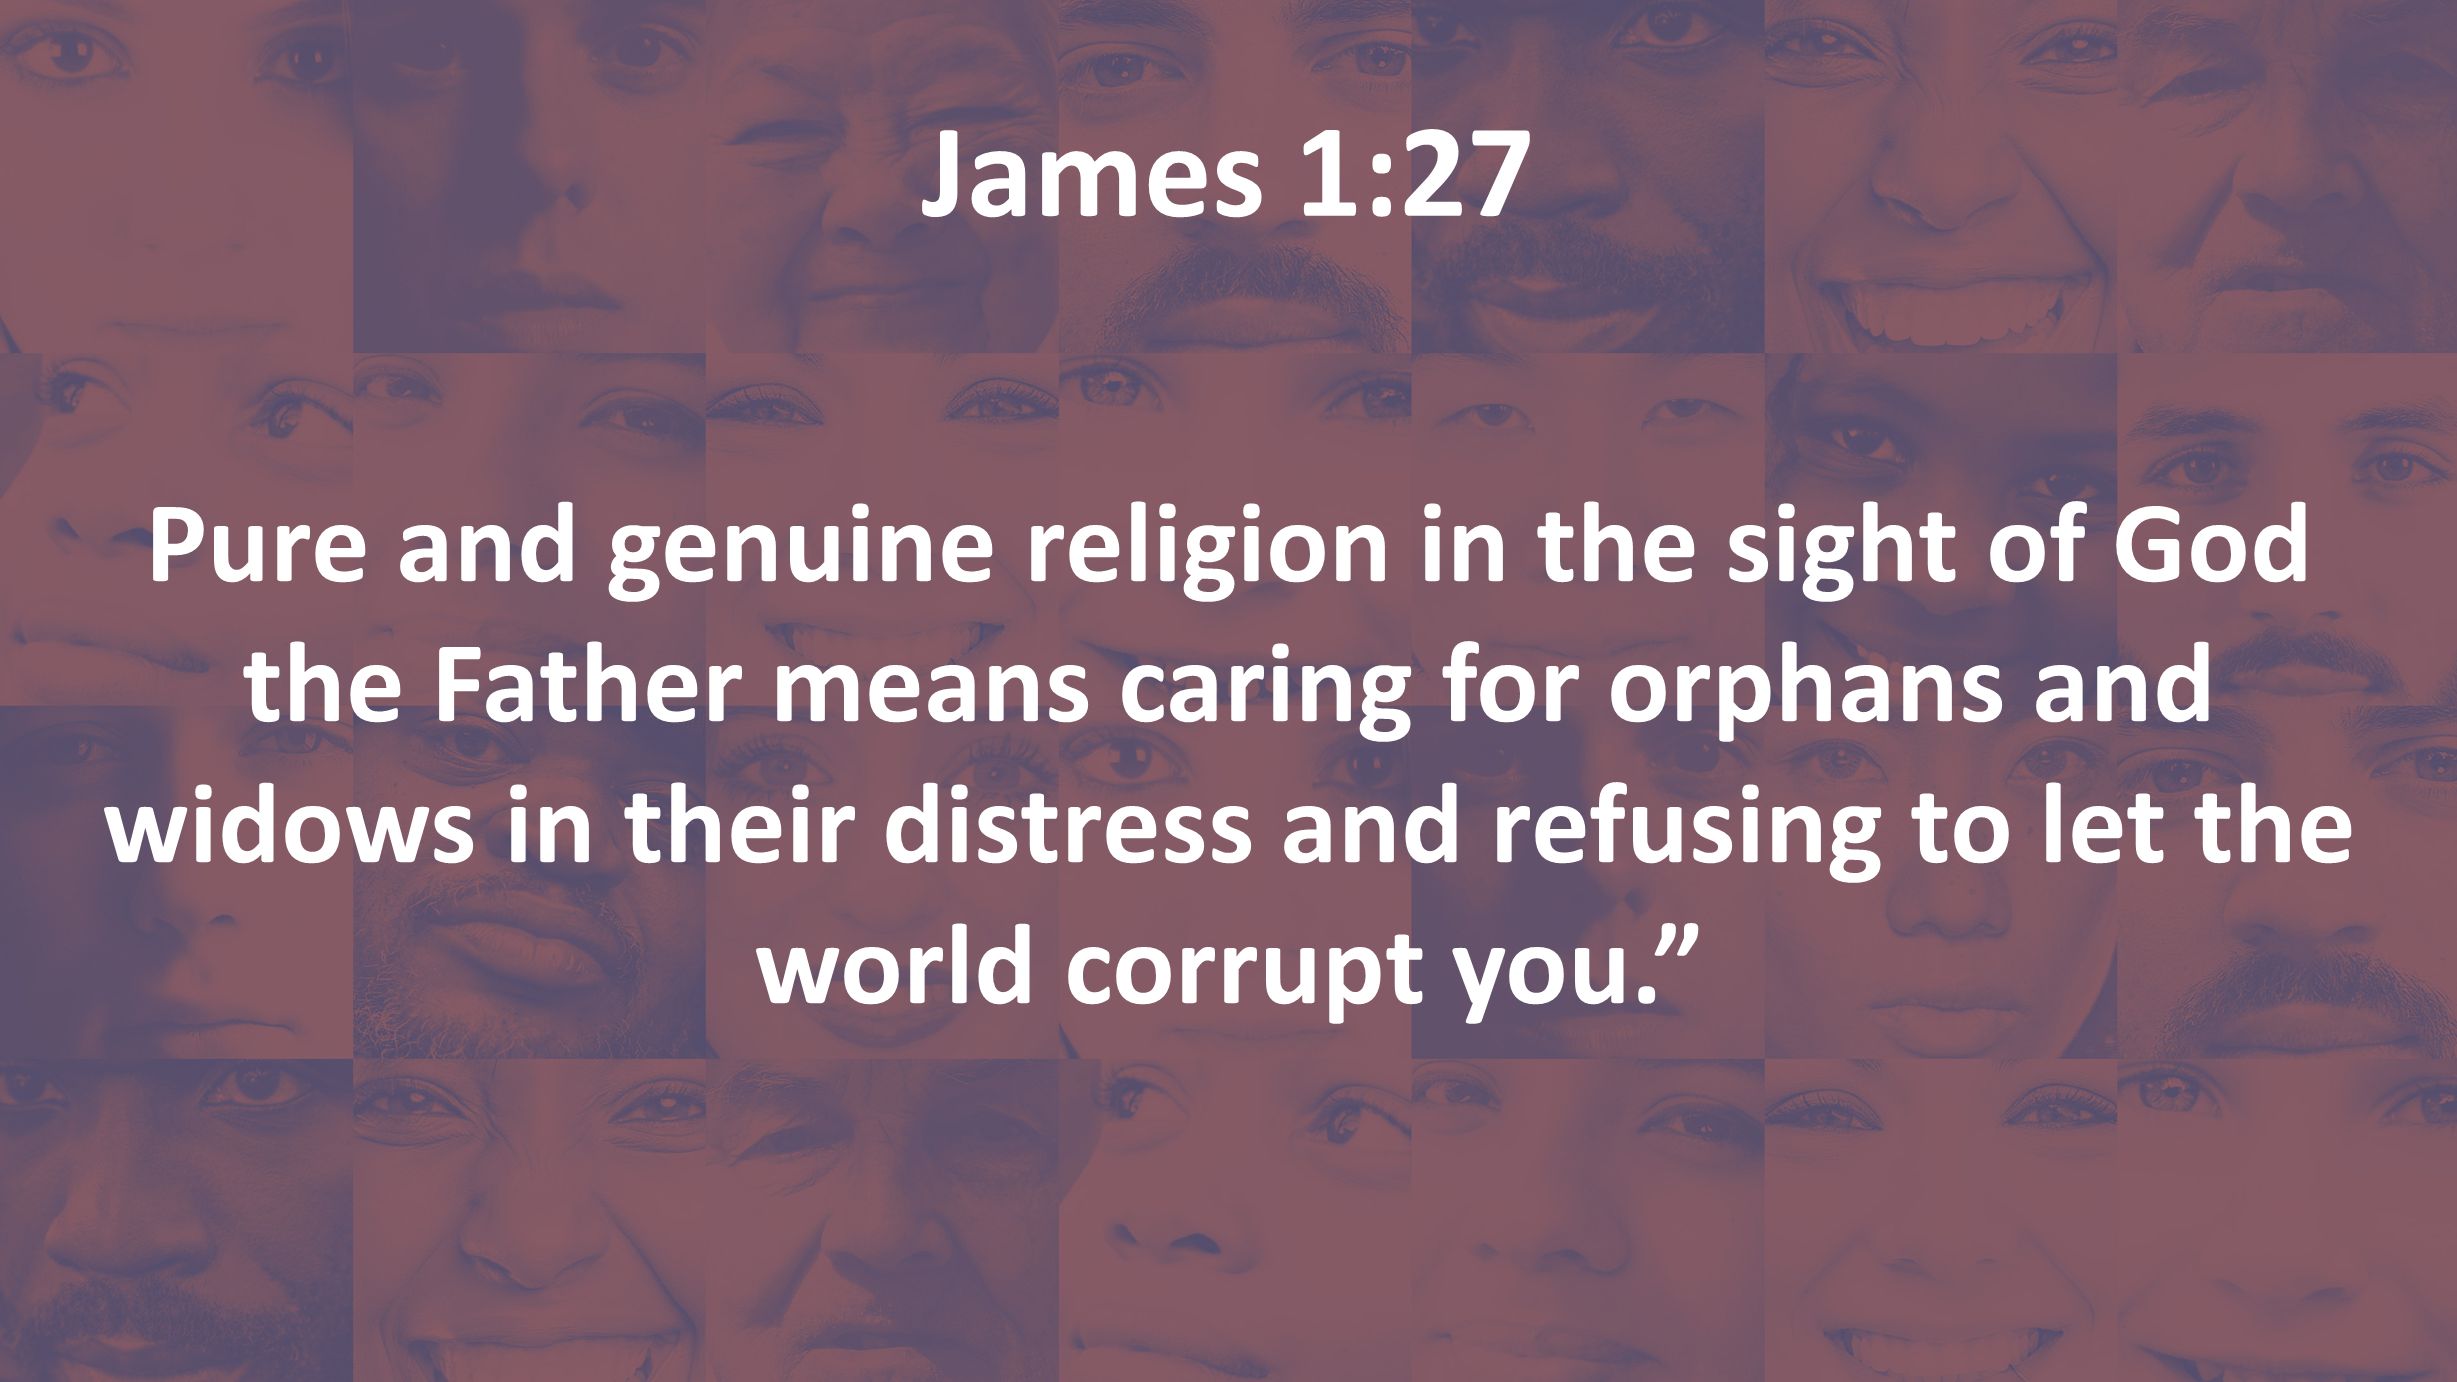 James 1:27 Pure and genuine religion in the sight of God the Father means caring for orphans and widows in their distress and refusing to let the world corrupt you.